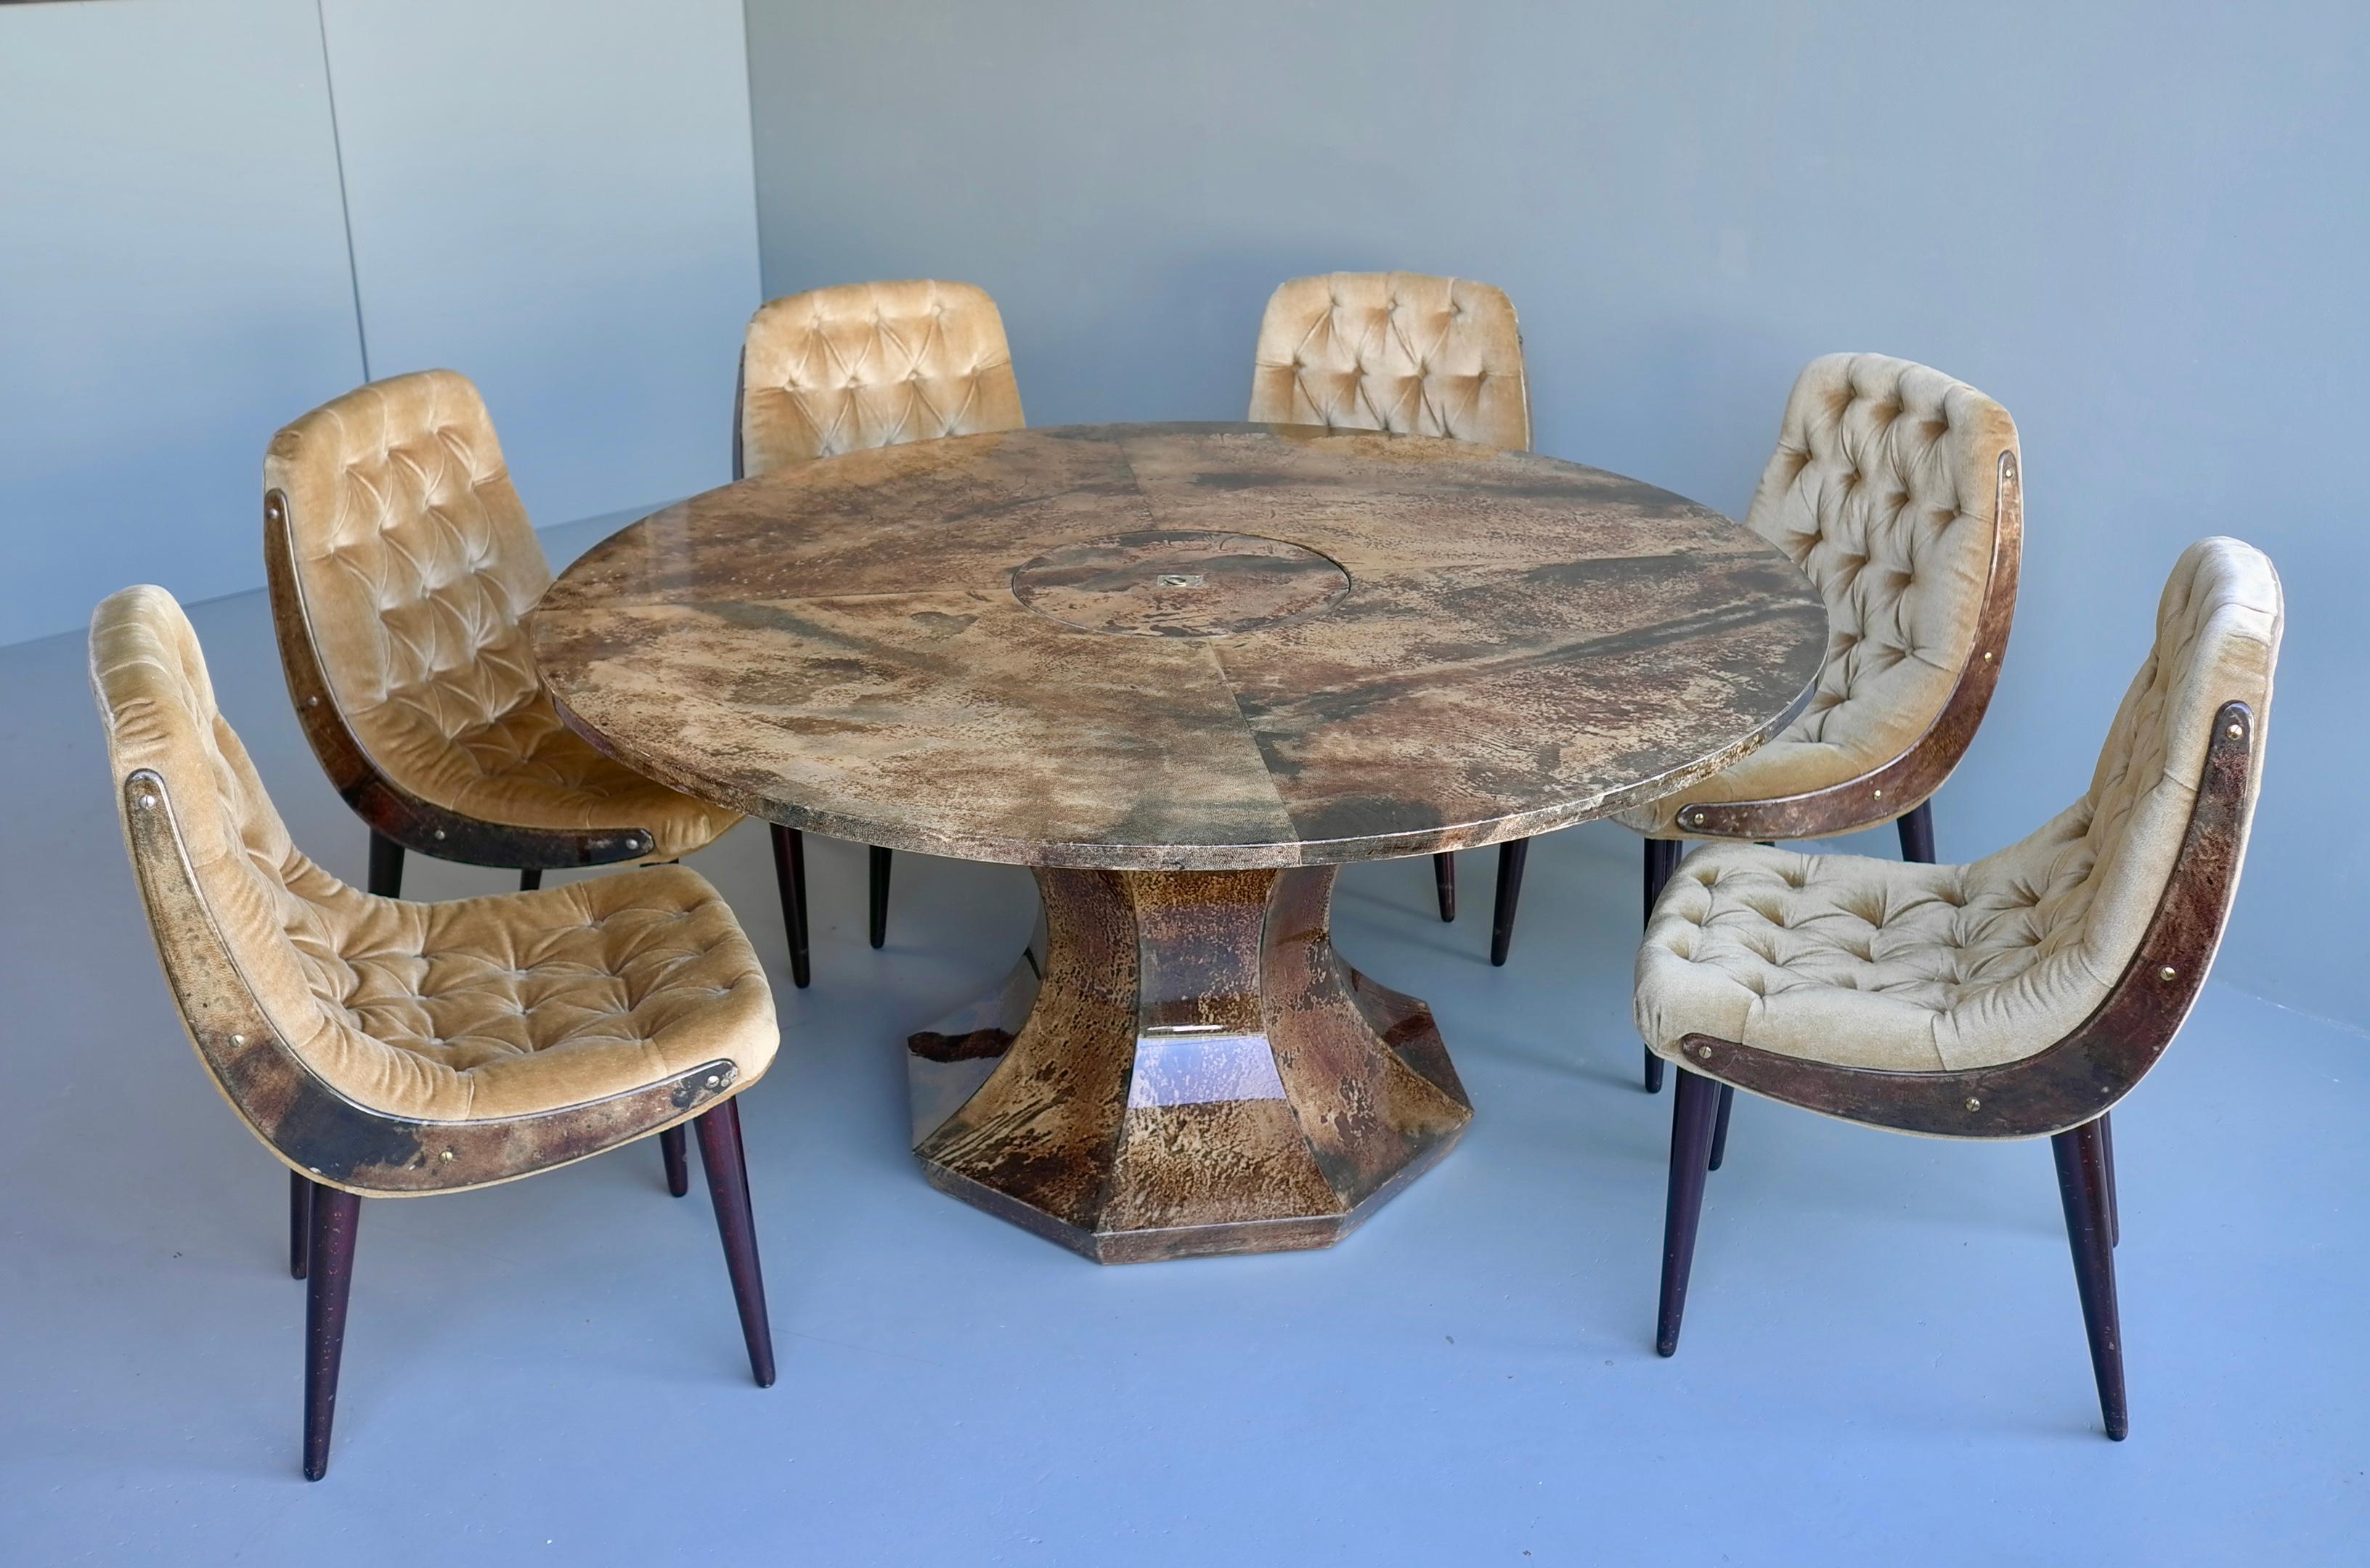 Italian Aldo Tura Dining Set, Goatskin Parchment Table with 6 Velvet Chairs, Italy 1950s For Sale